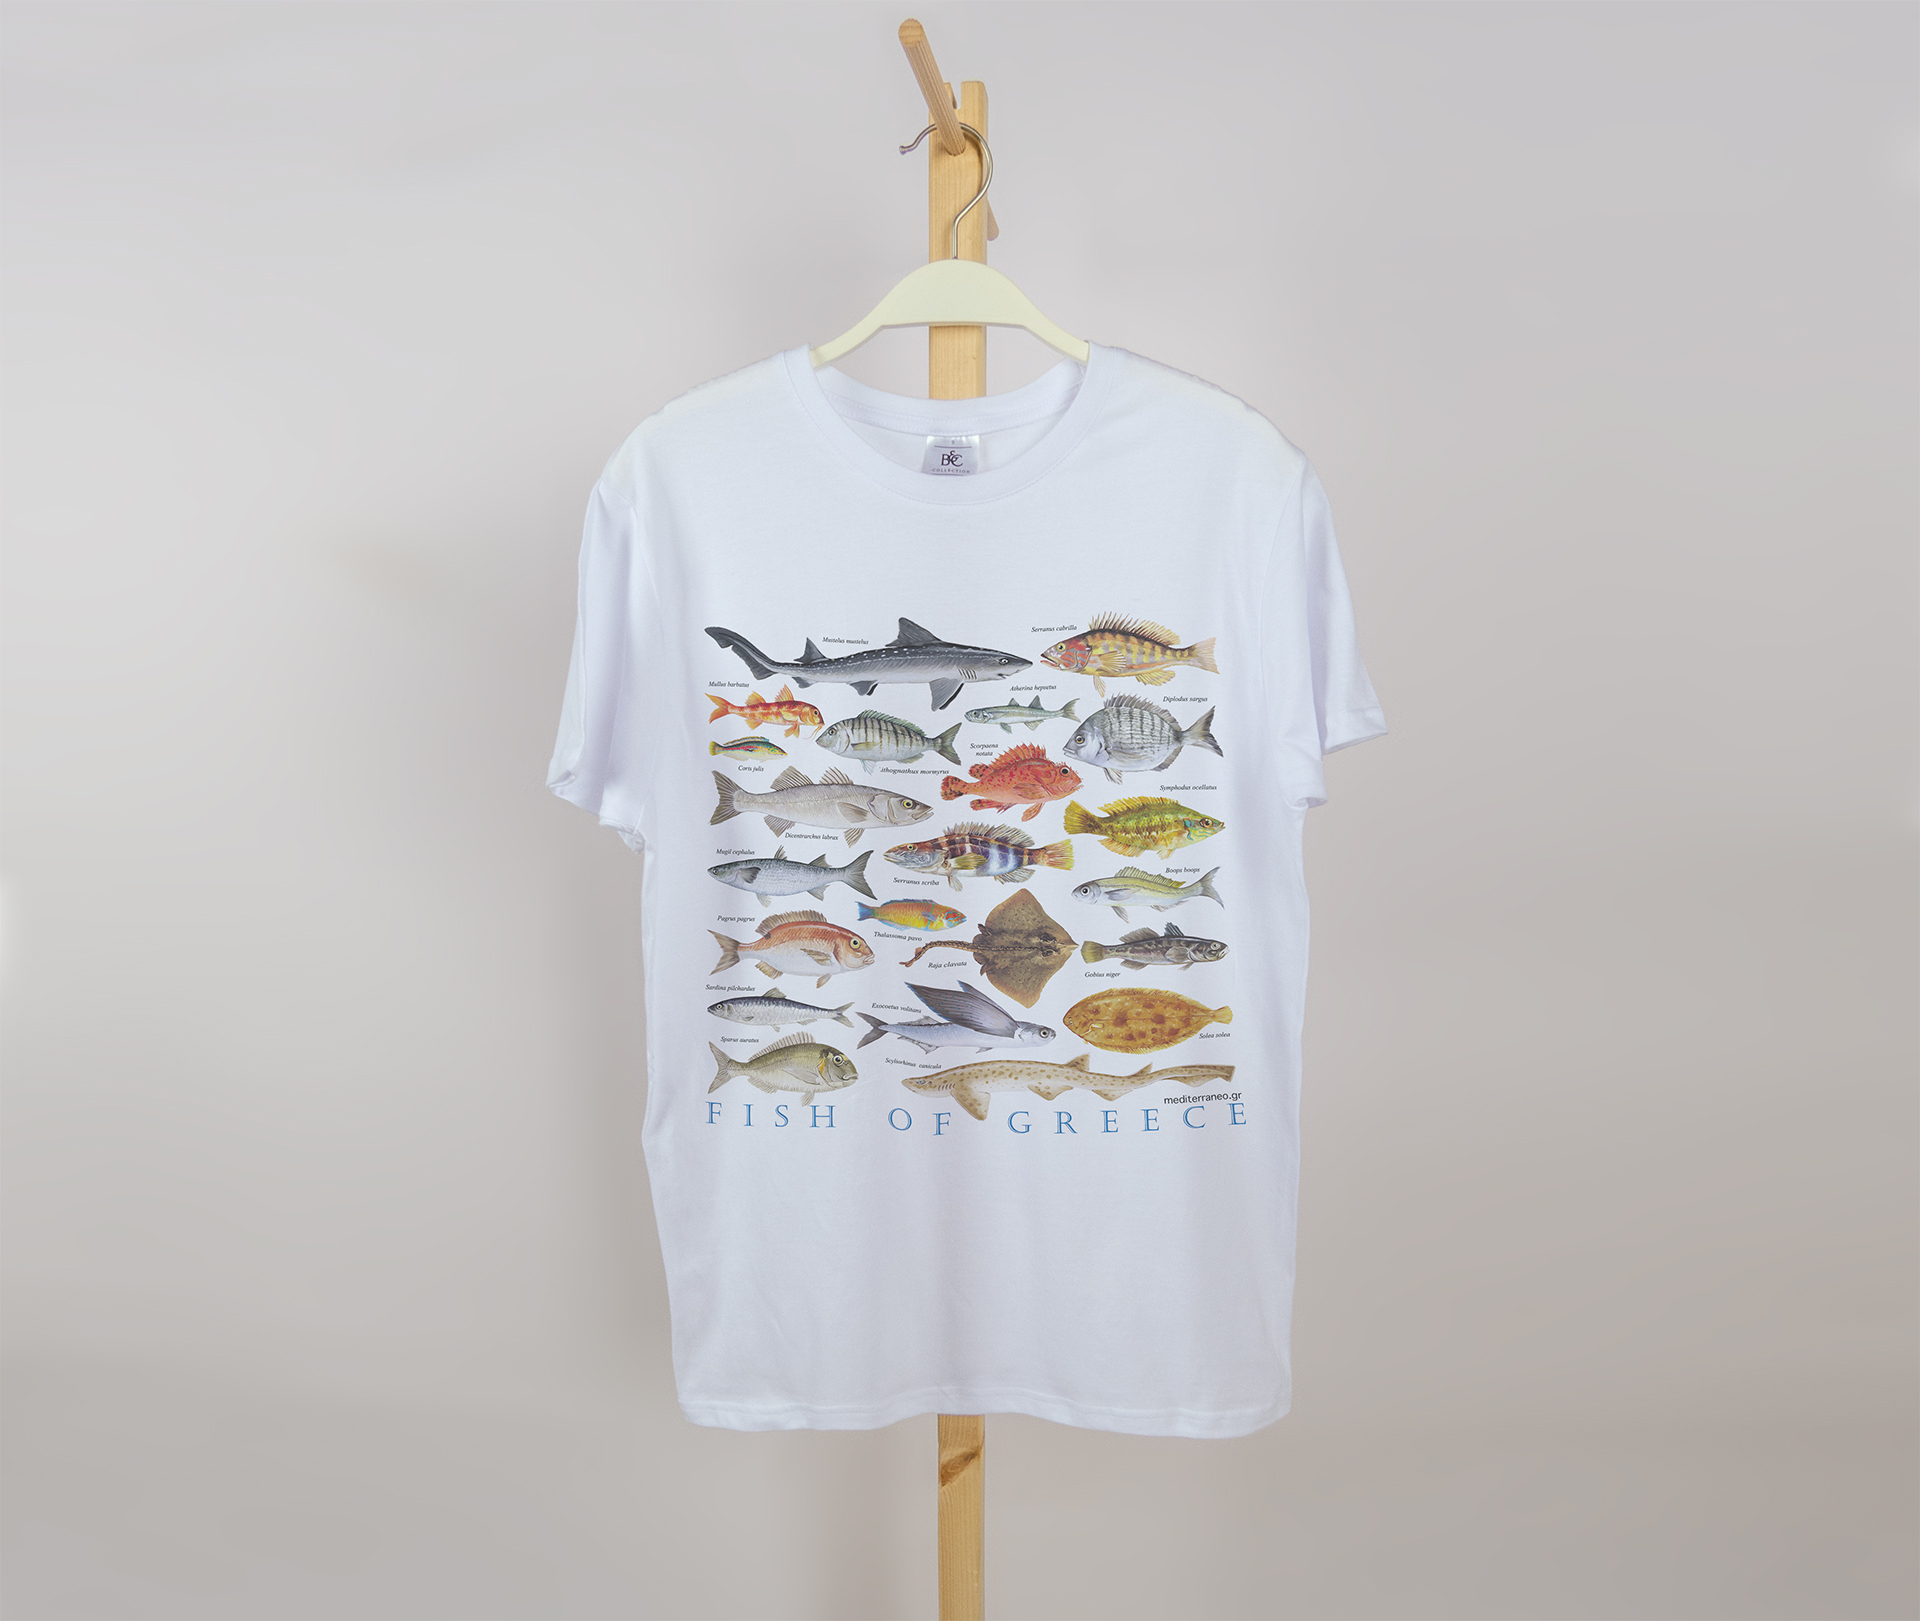 Men cotton T-shirt with fish of Greece print by Mediterraneo